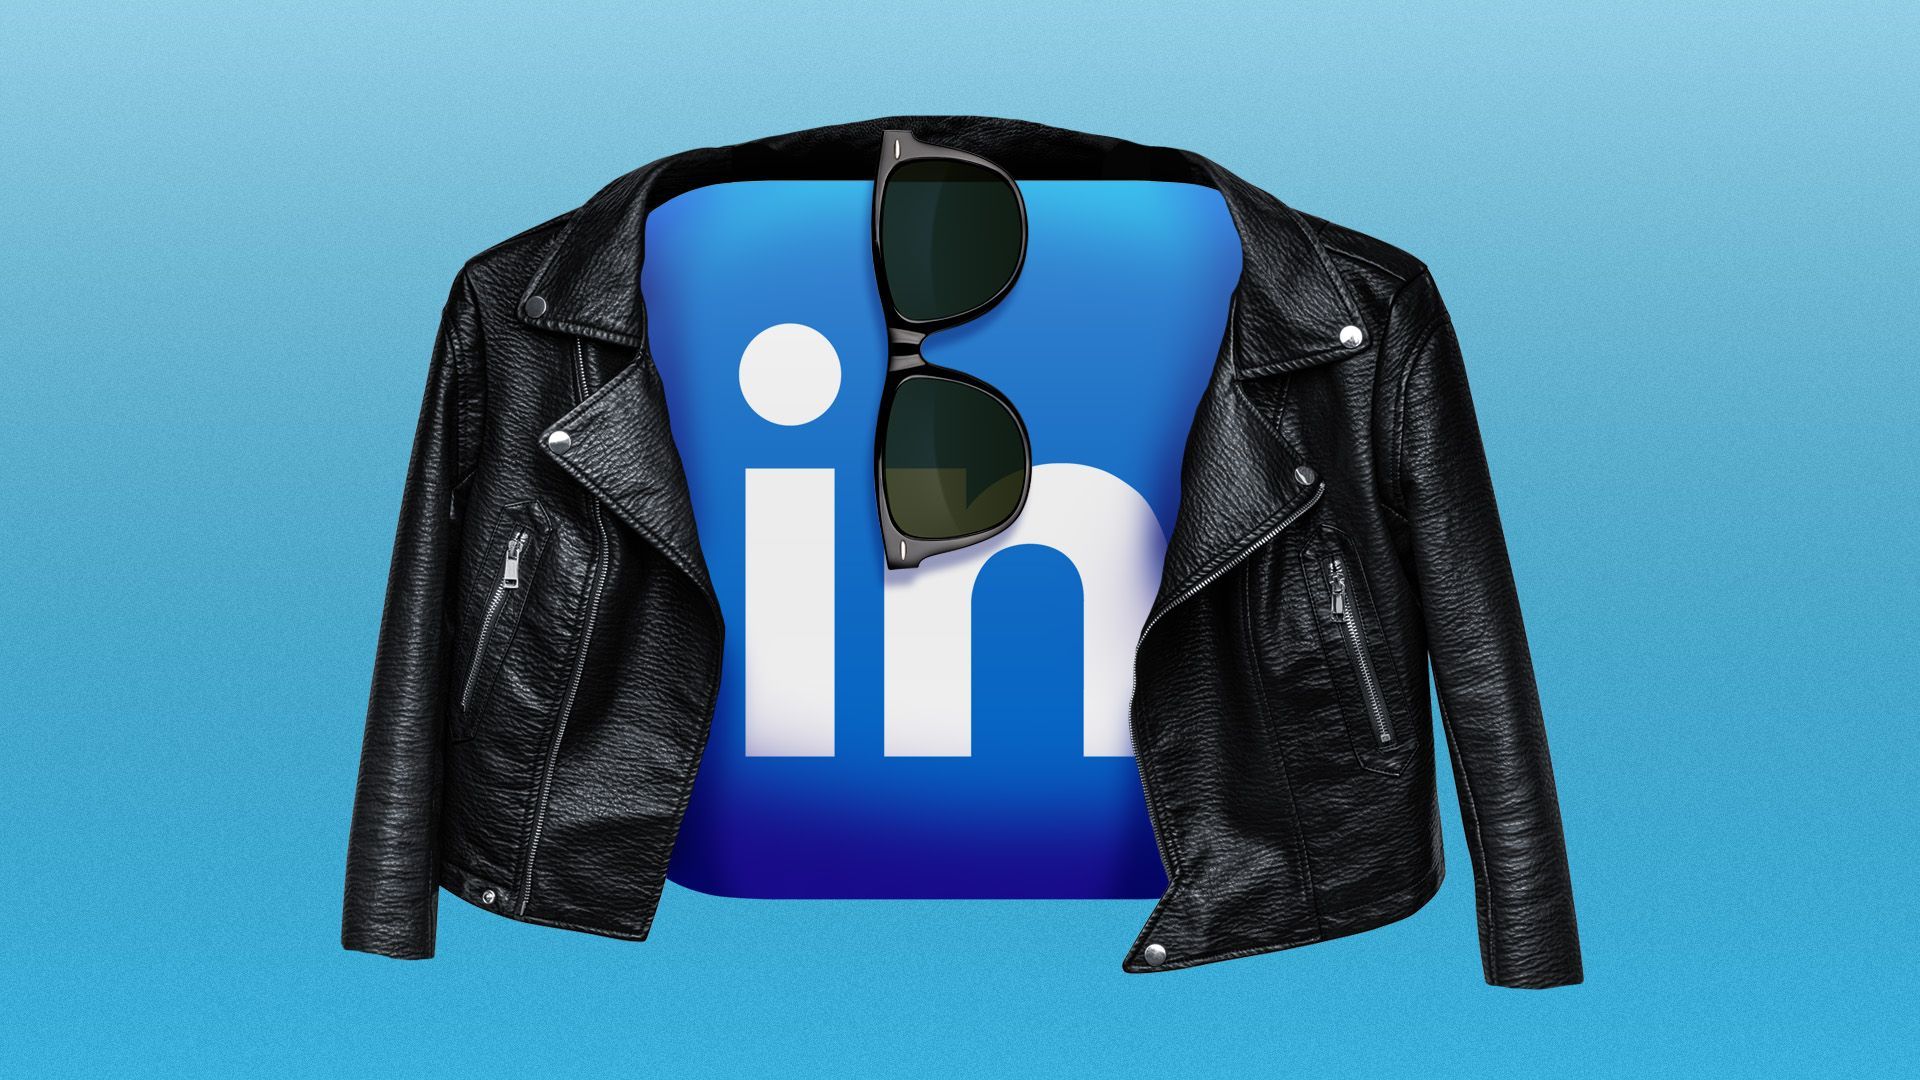 Illustration of a LinkedIn logo icon wearing a leather jacket and sunglasses